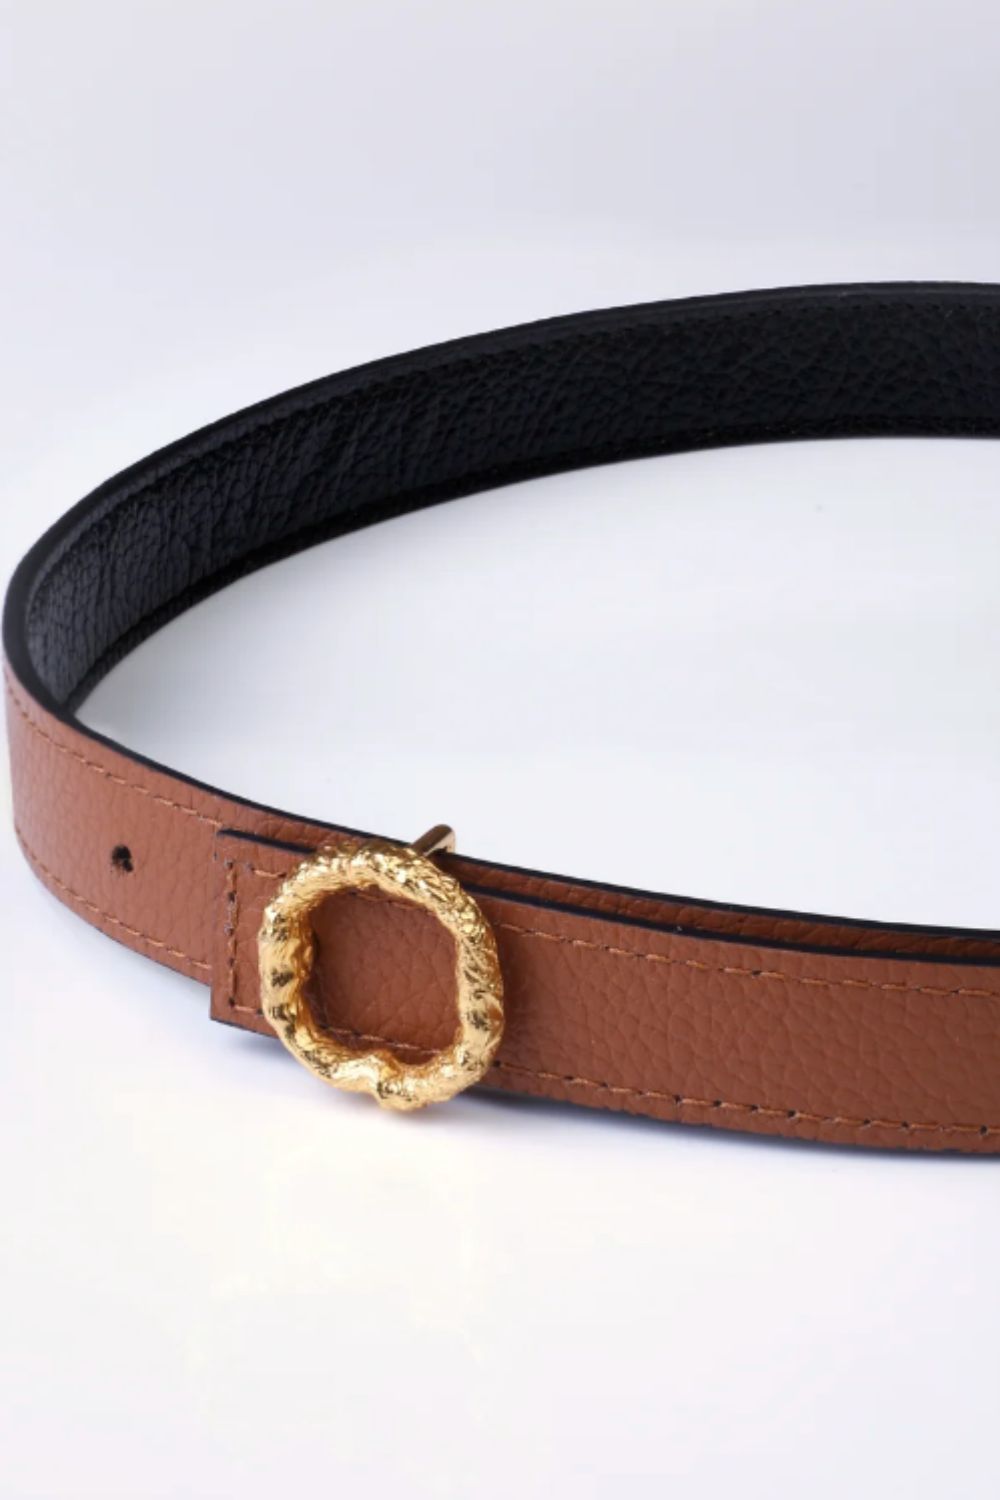 Thin Belt- Black & Tan With Gold Round Buckle